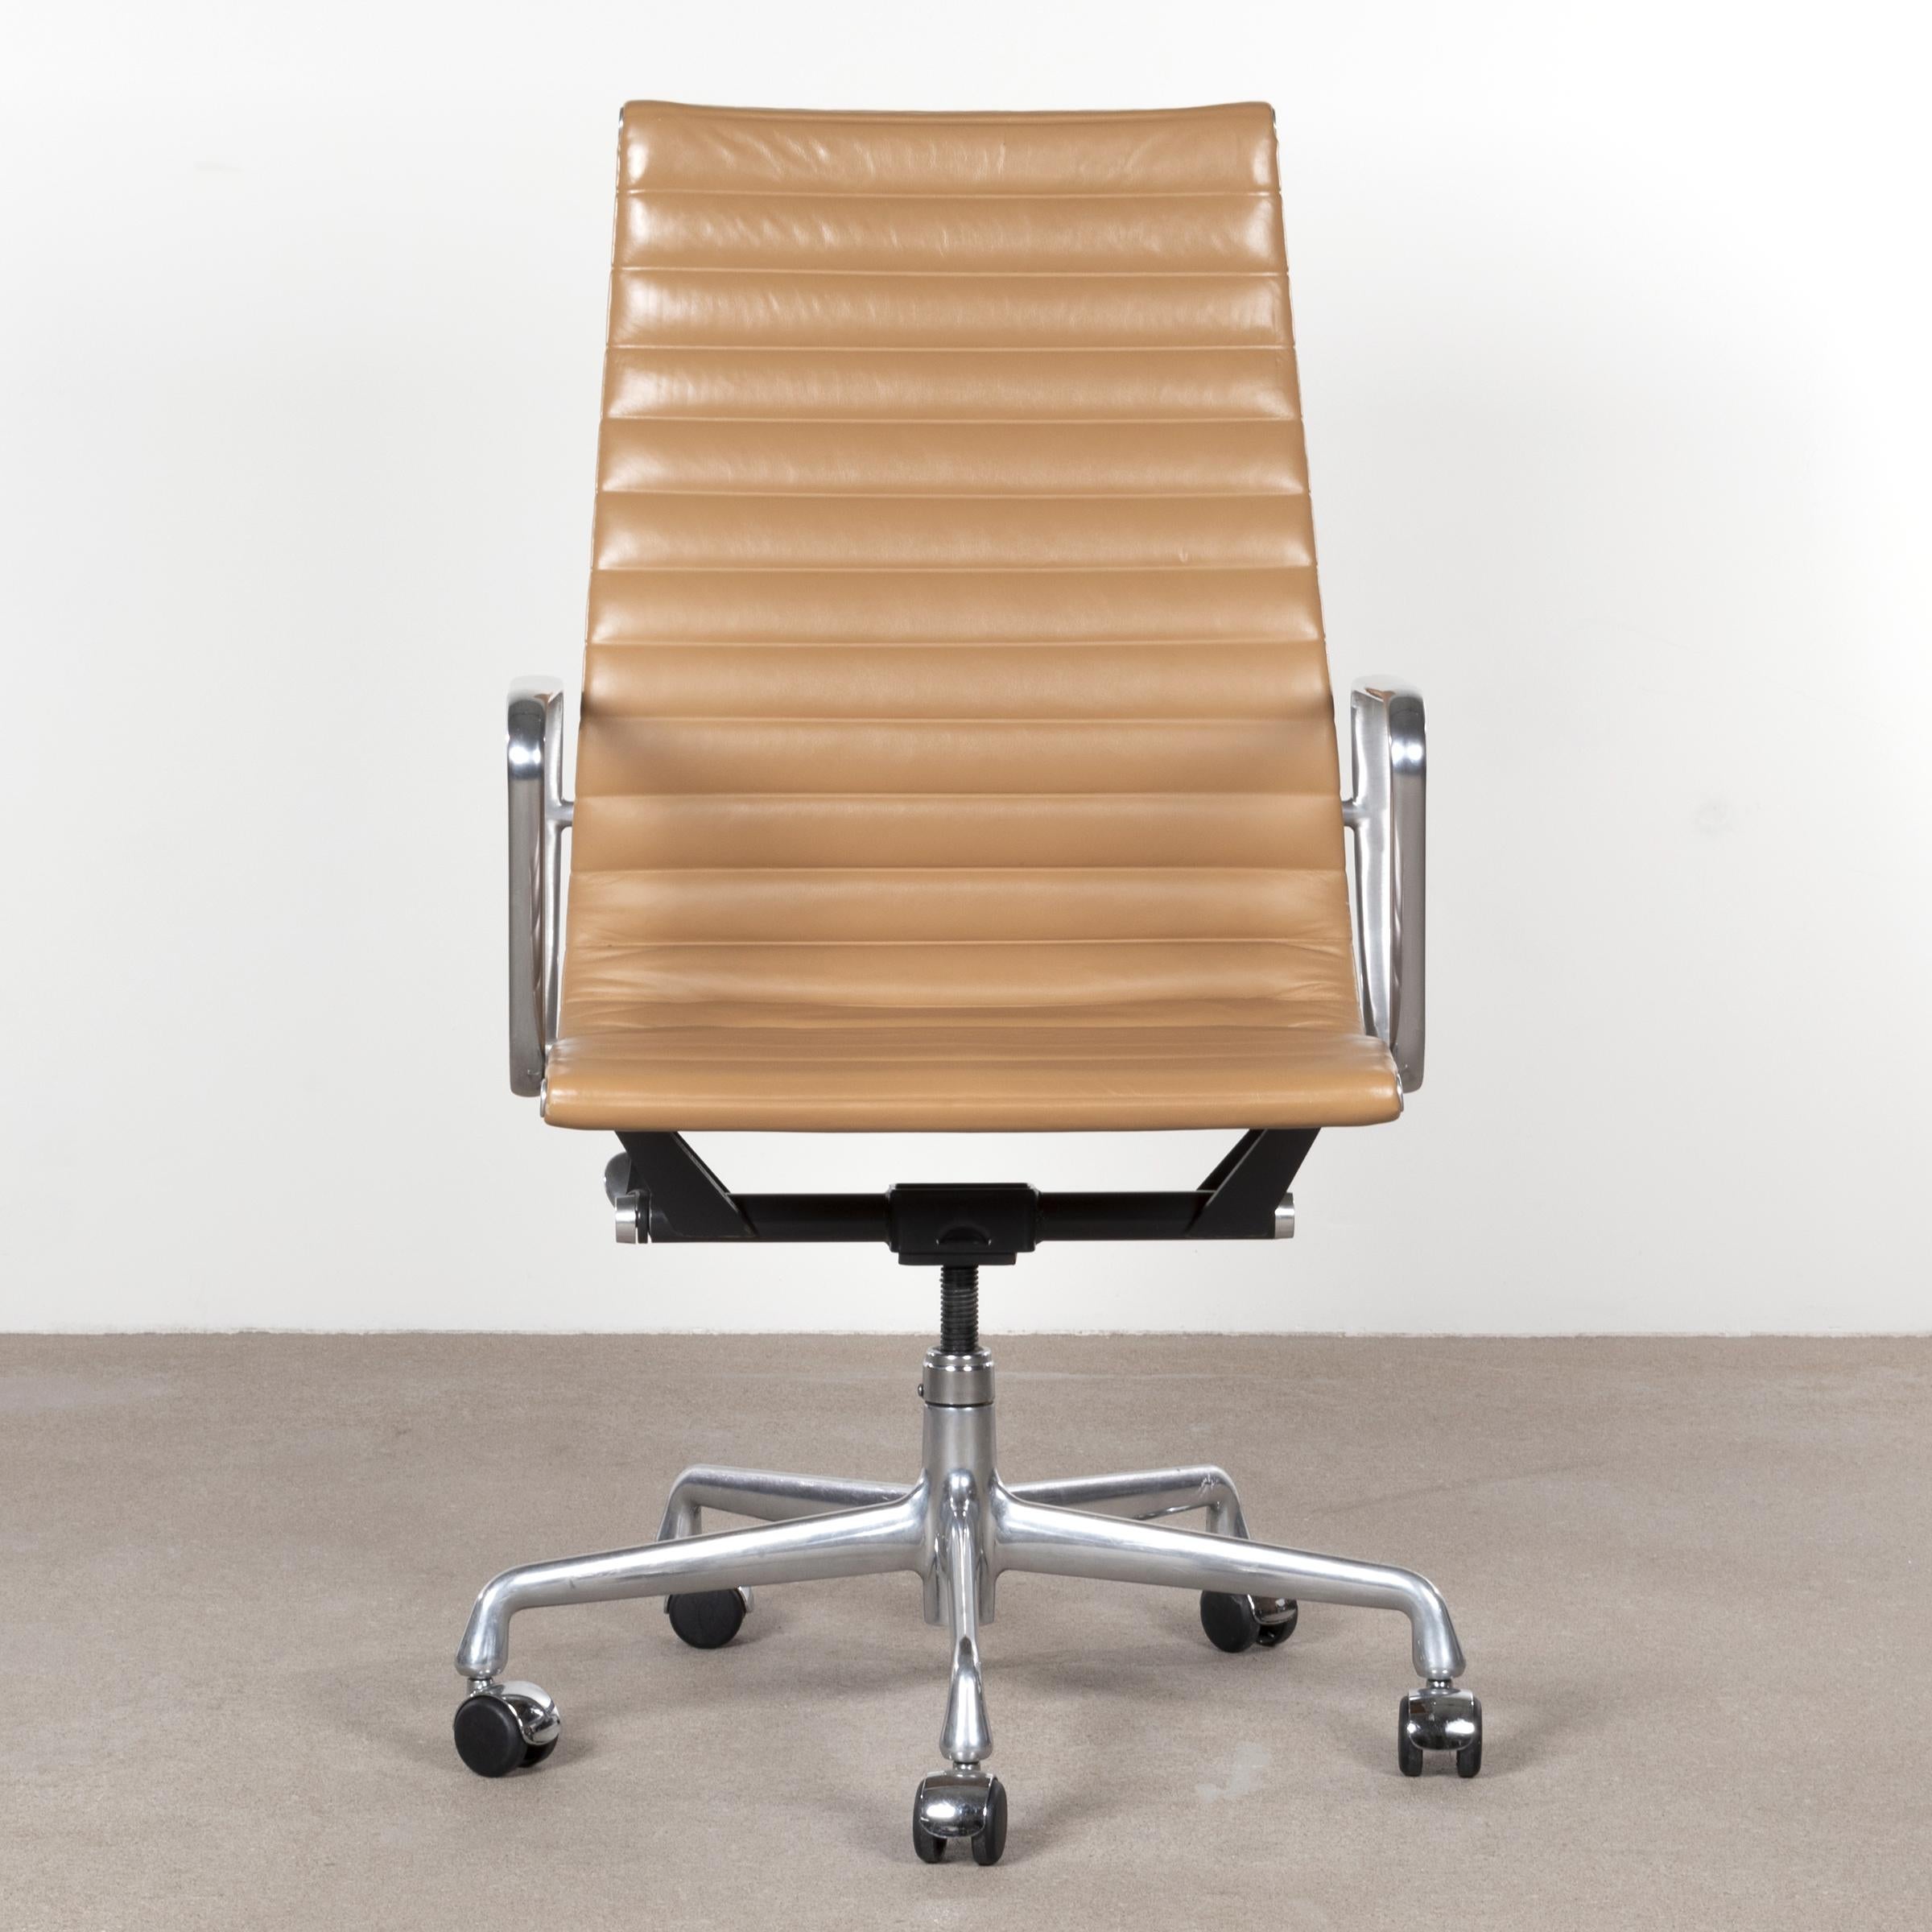 Mid-20th Century Eames Executive Office Chair in Cognac Leather for Herman Miller, USA